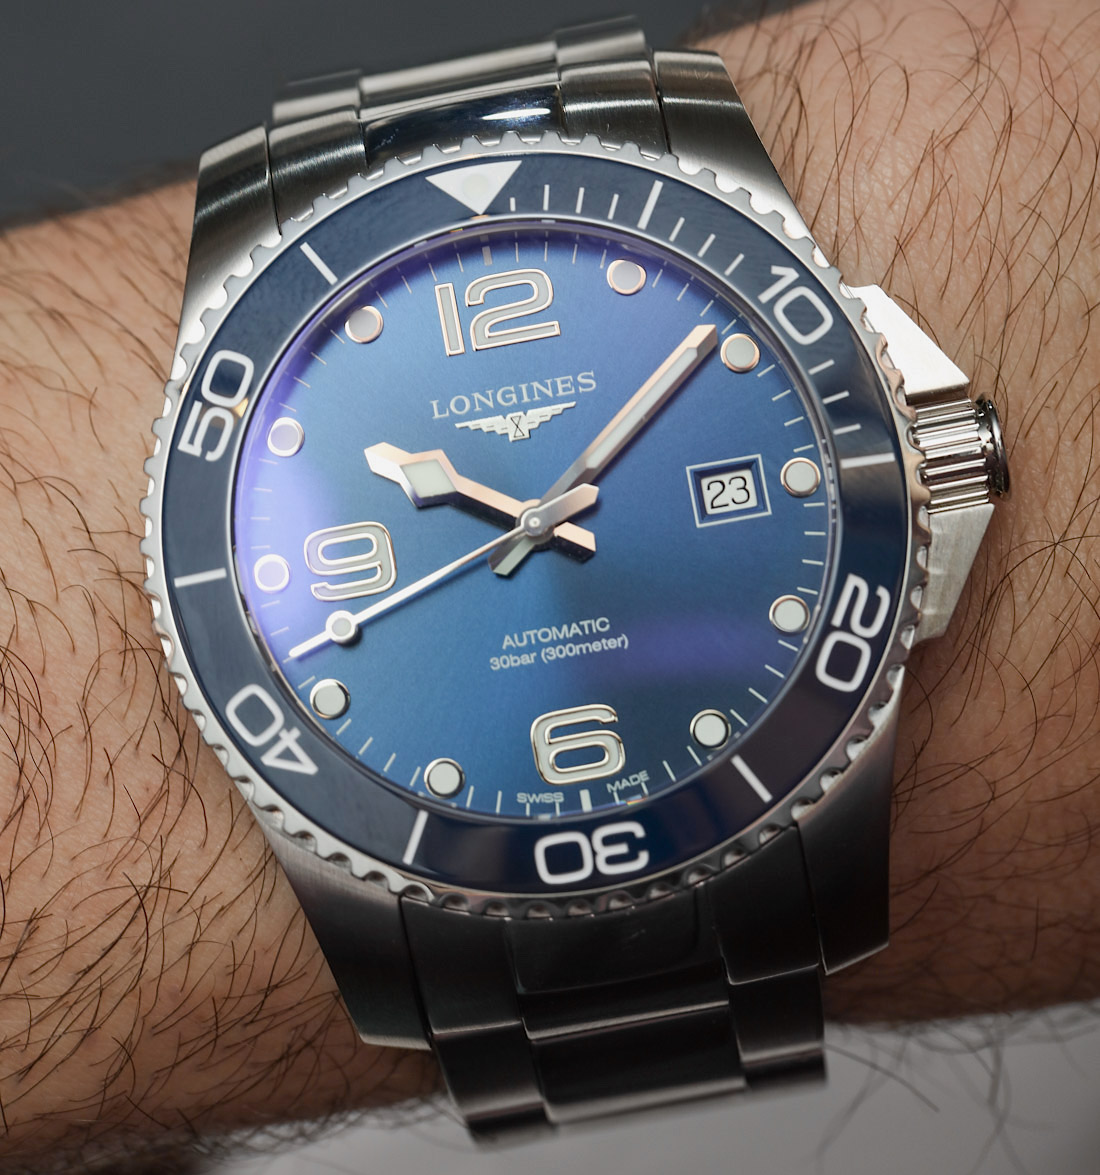 Longines HydroConquest \u0026 USA Edition Dive Watches Hands-On | aBlogtoWatch